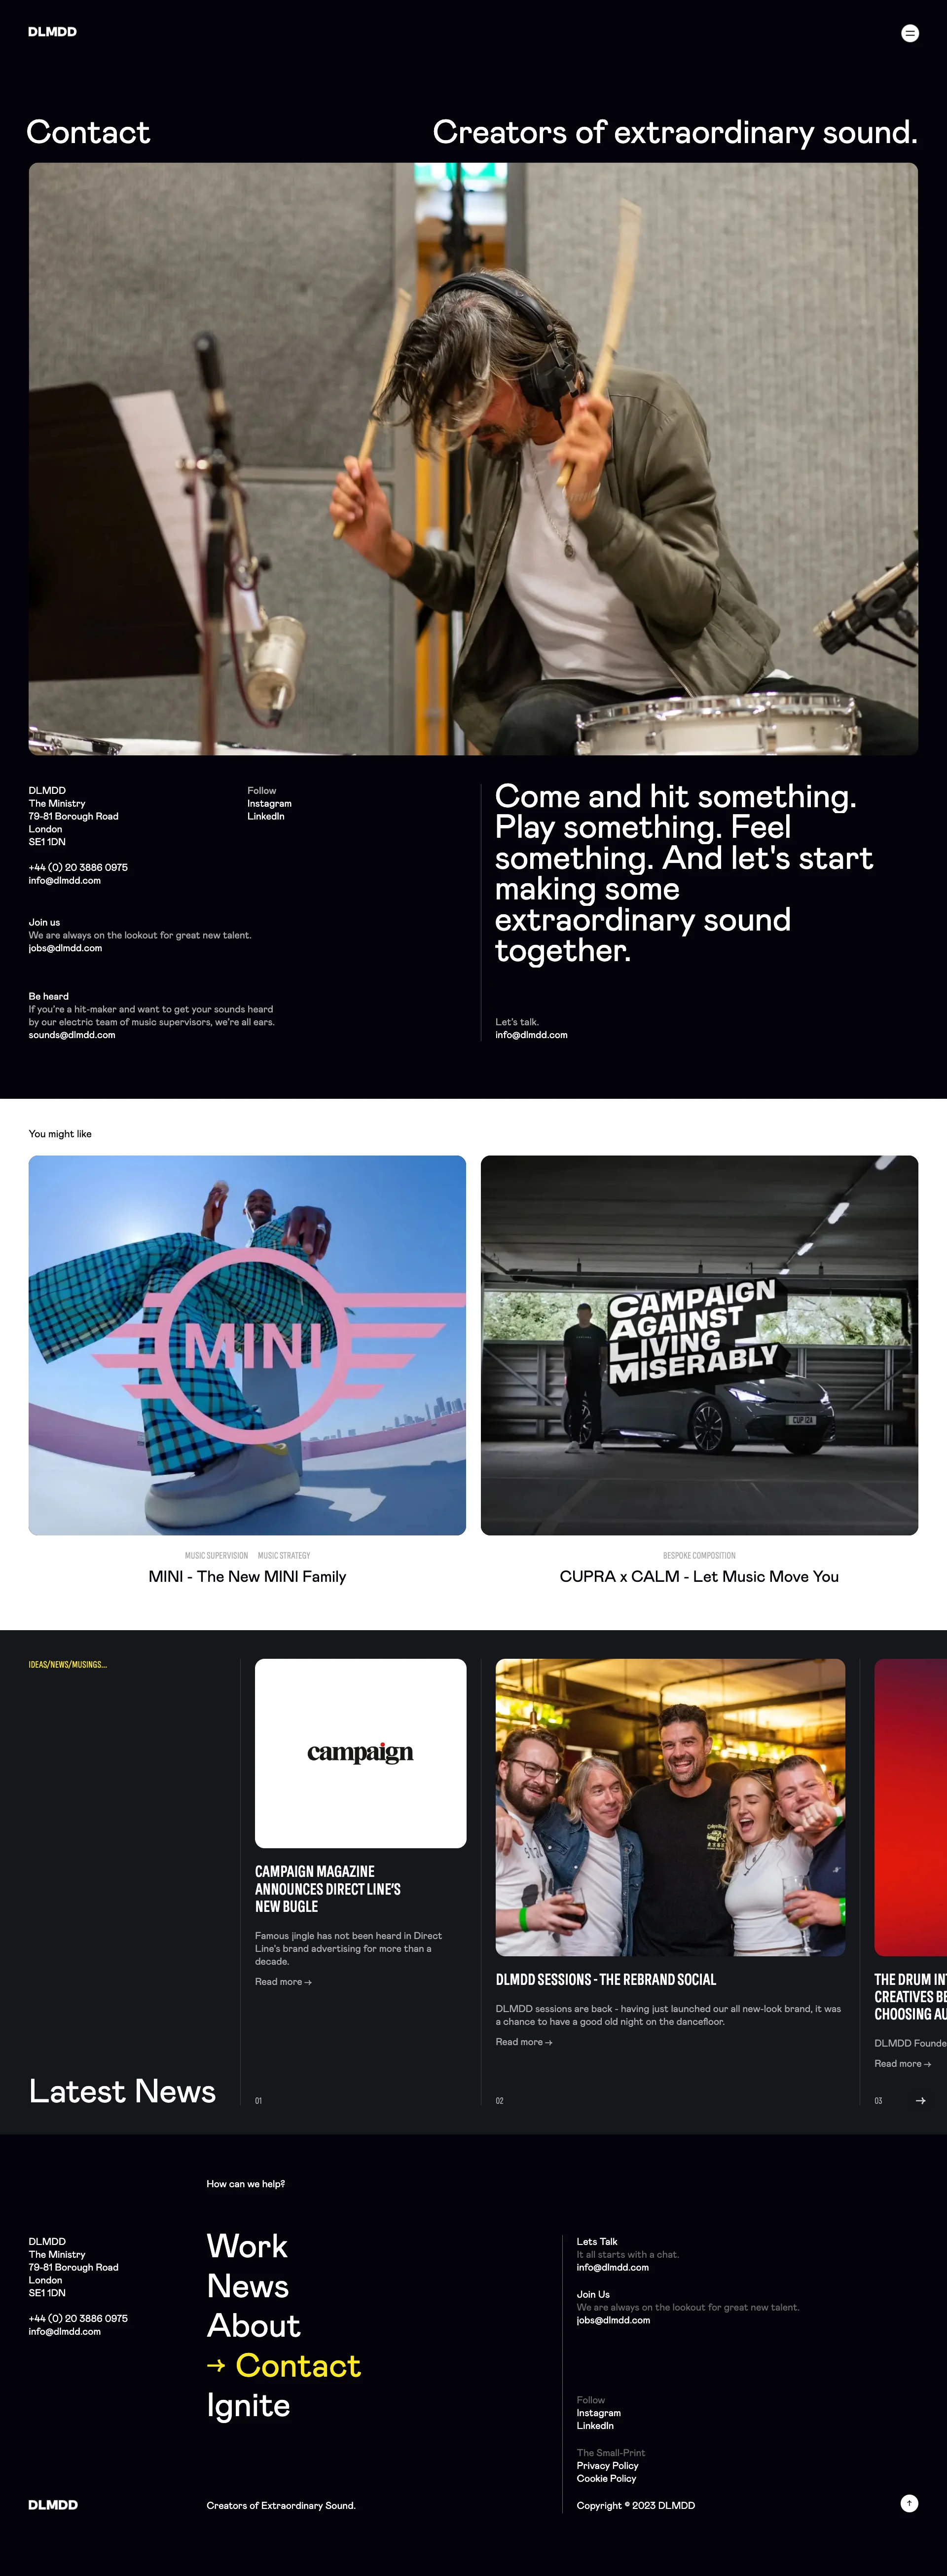 DLMDD Landing Page Example: Creators of extraordinary sound. We're an agency of advertising-wired musicians making brands famous for how they sound.